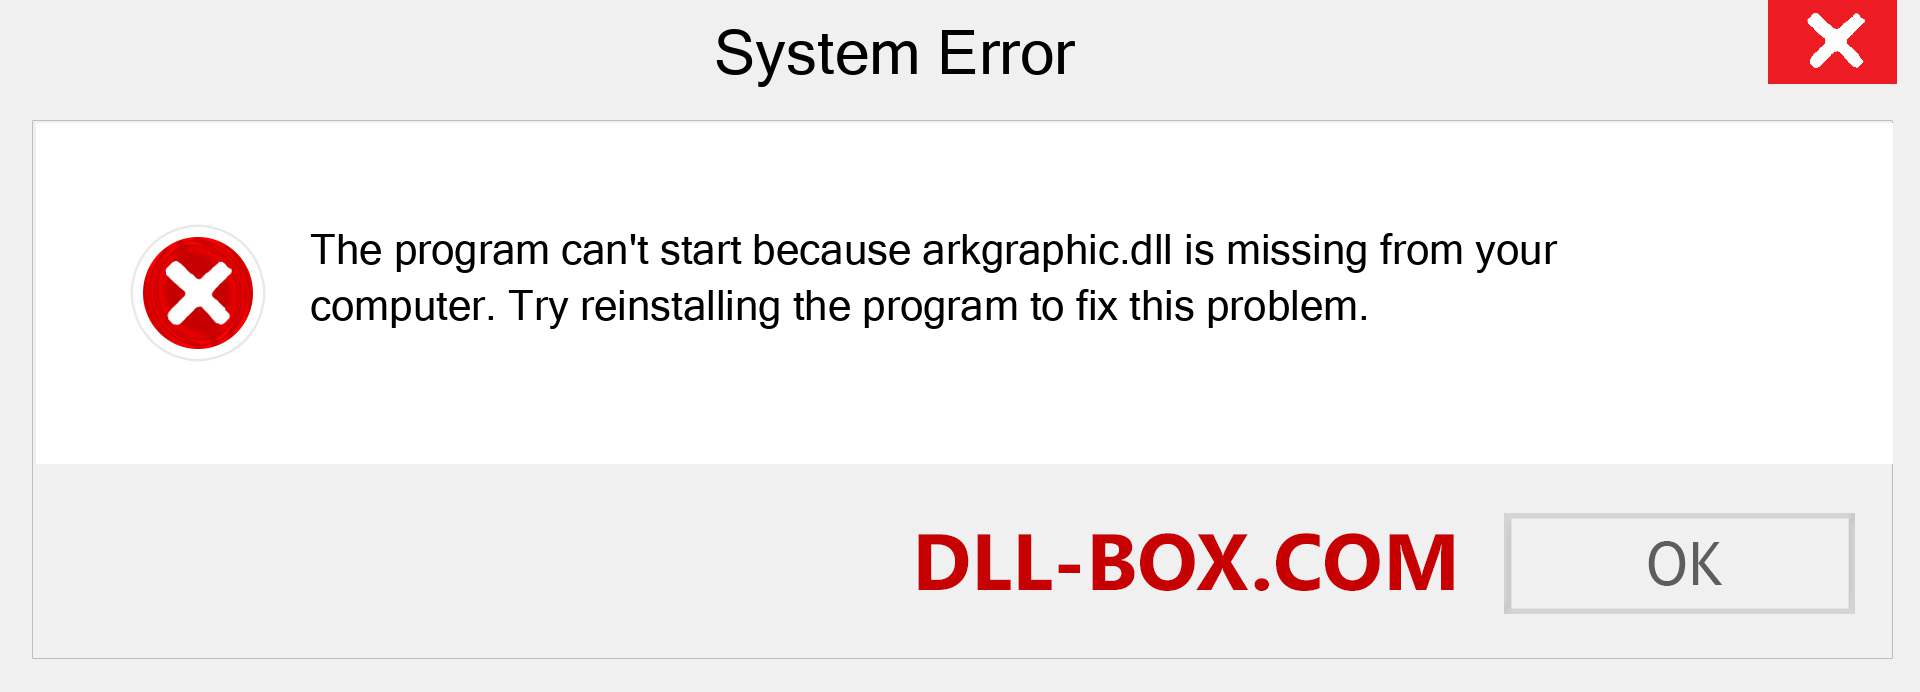  arkgraphic.dll file is missing?. Download for Windows 7, 8, 10 - Fix  arkgraphic dll Missing Error on Windows, photos, images